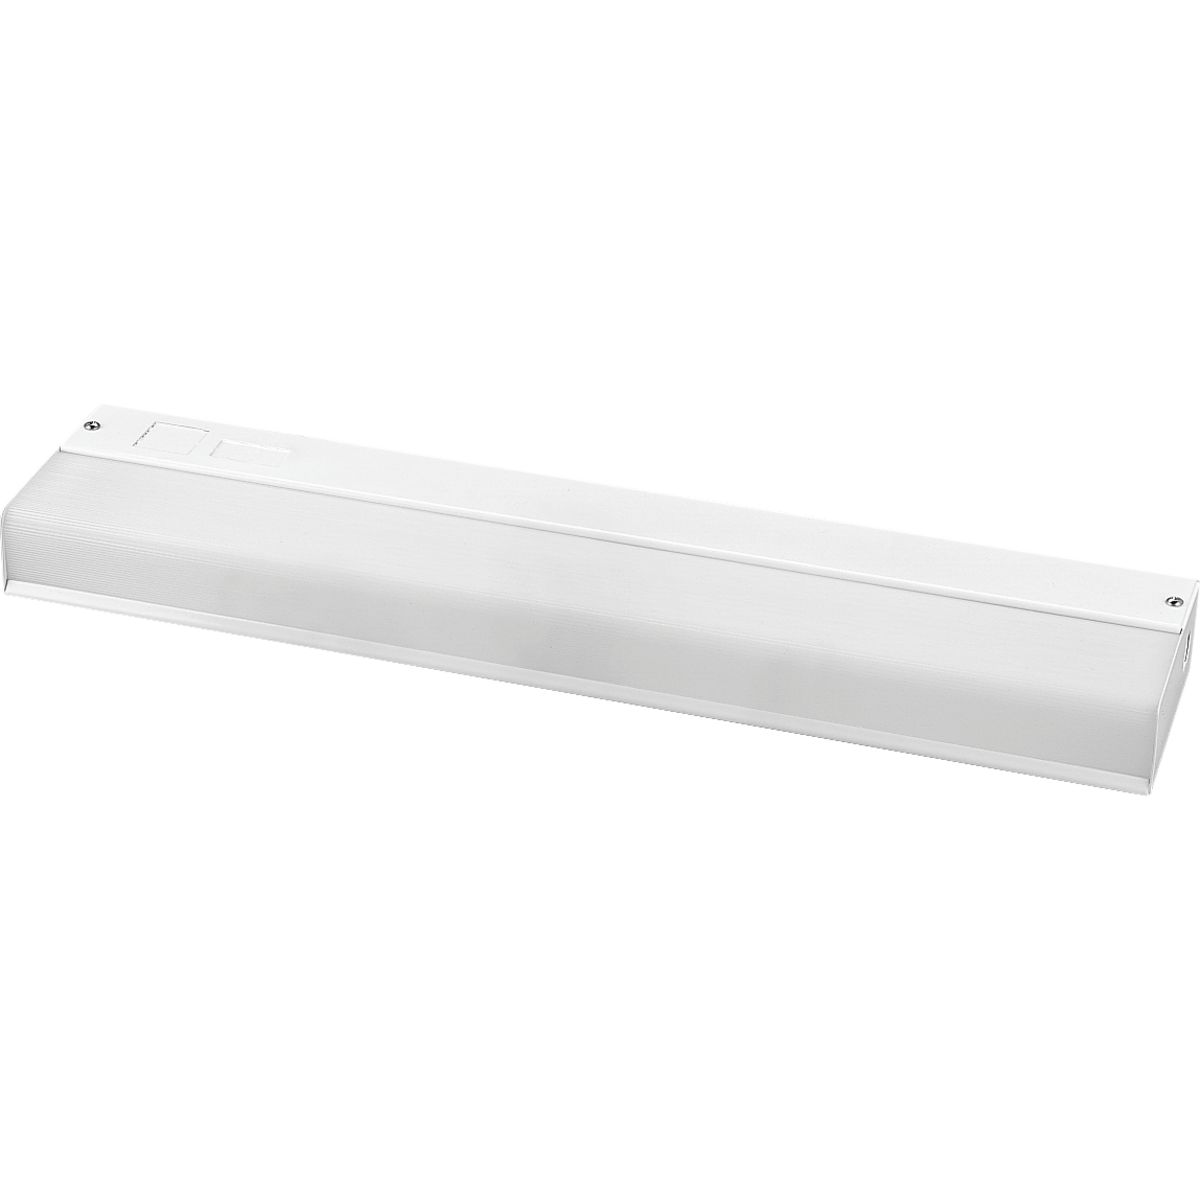 48 in CFL undercabinet fixture. Mount easily under cabinets and shelves, over a desk, in kitchens or any work area. All have a white acrylic diffuser and white baked enamel housing. 120V NPF electronic ballast. T-8 bulb.